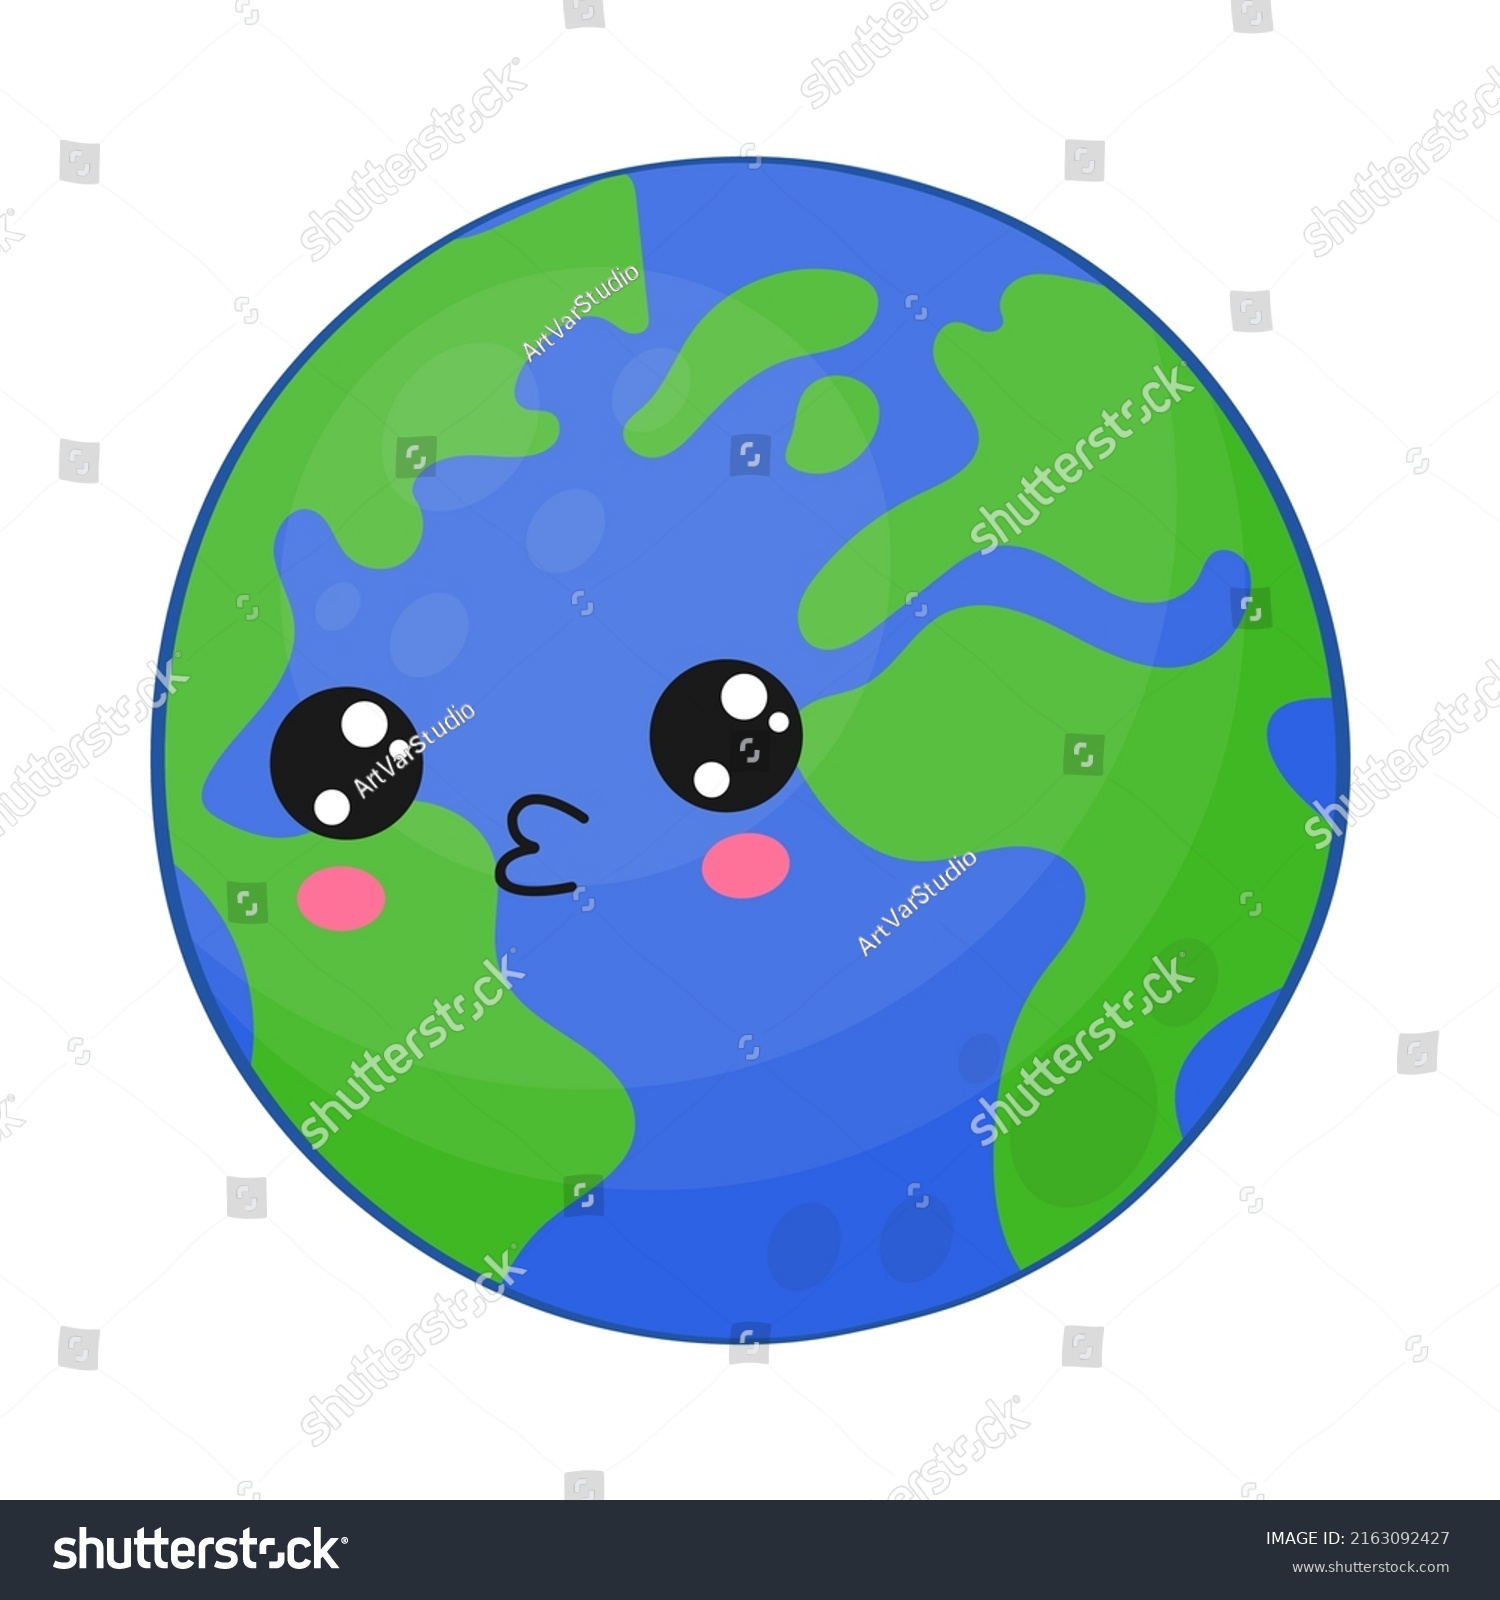 SVG of Cute kawaii planet Earth Vector illustration of a planet. Picture of planet for kids, baby book, fairy tales, covers, baby shower invitation, textile t-shirt.
 svg